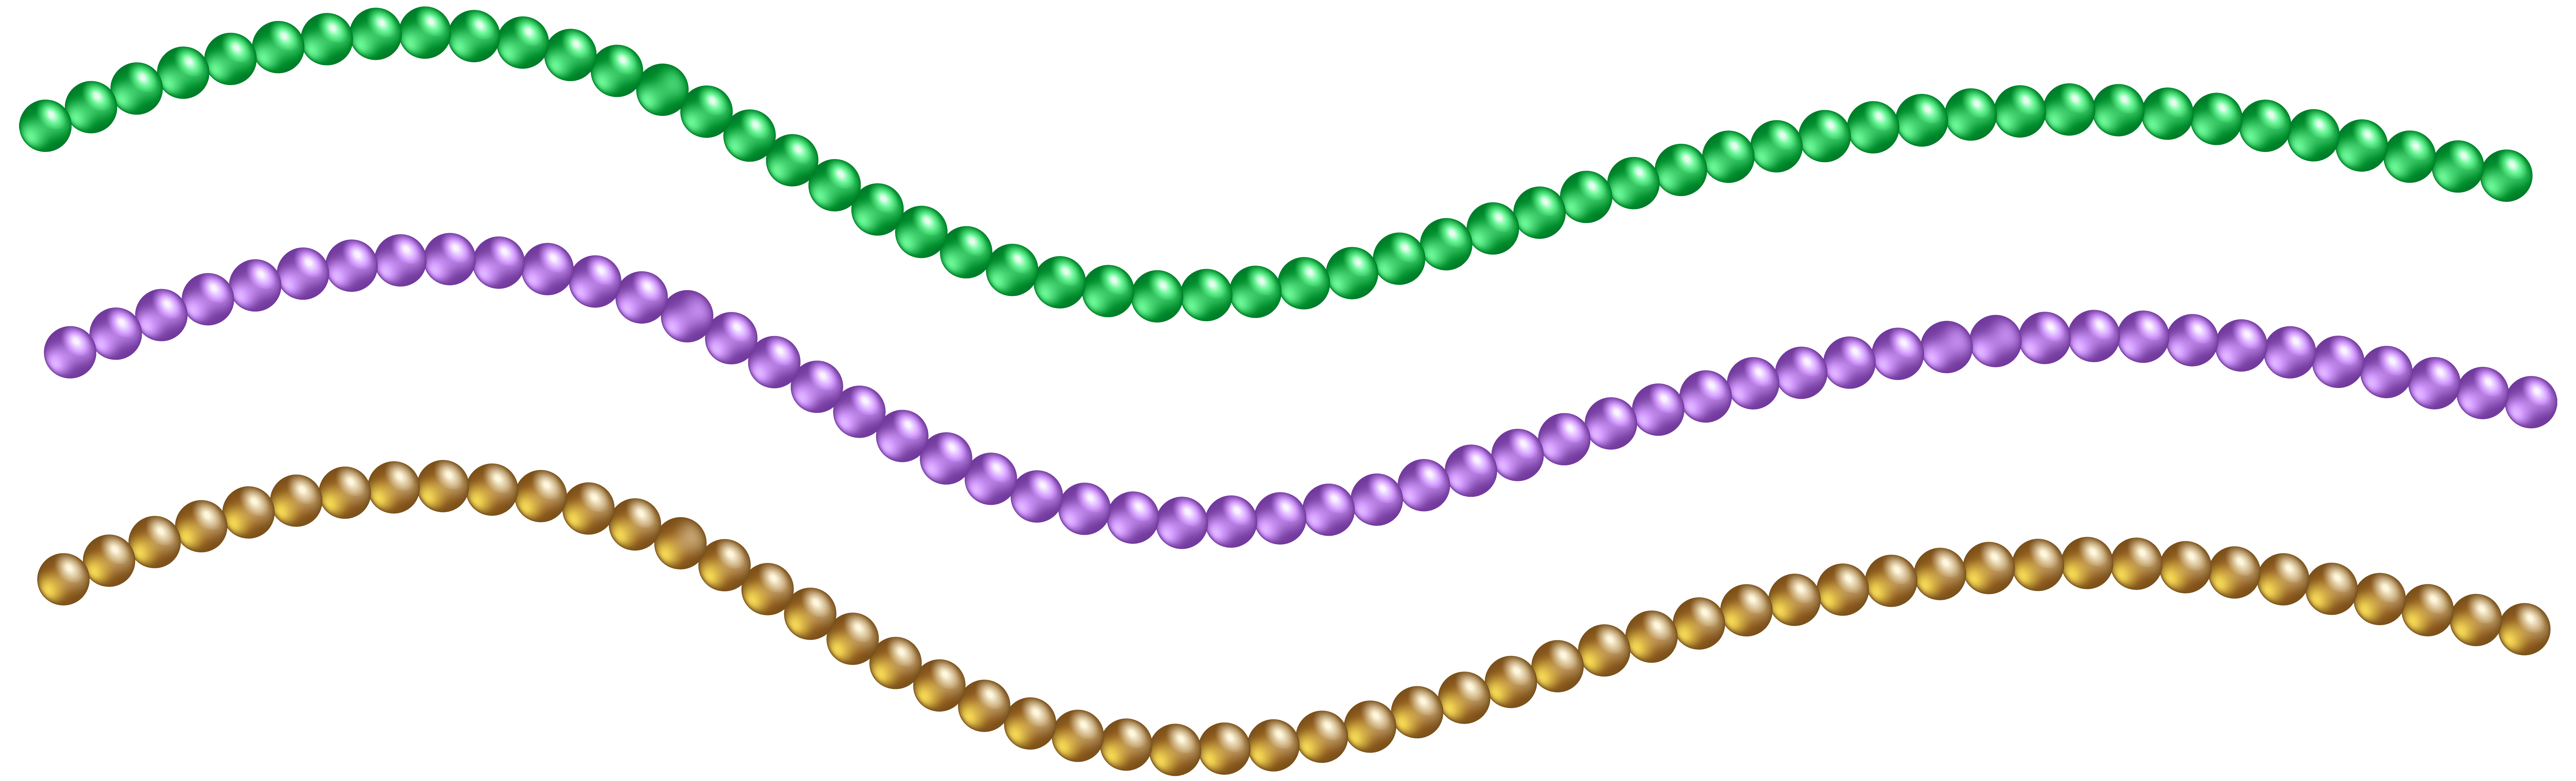 Beads Decoration PNG Clip Art Image.